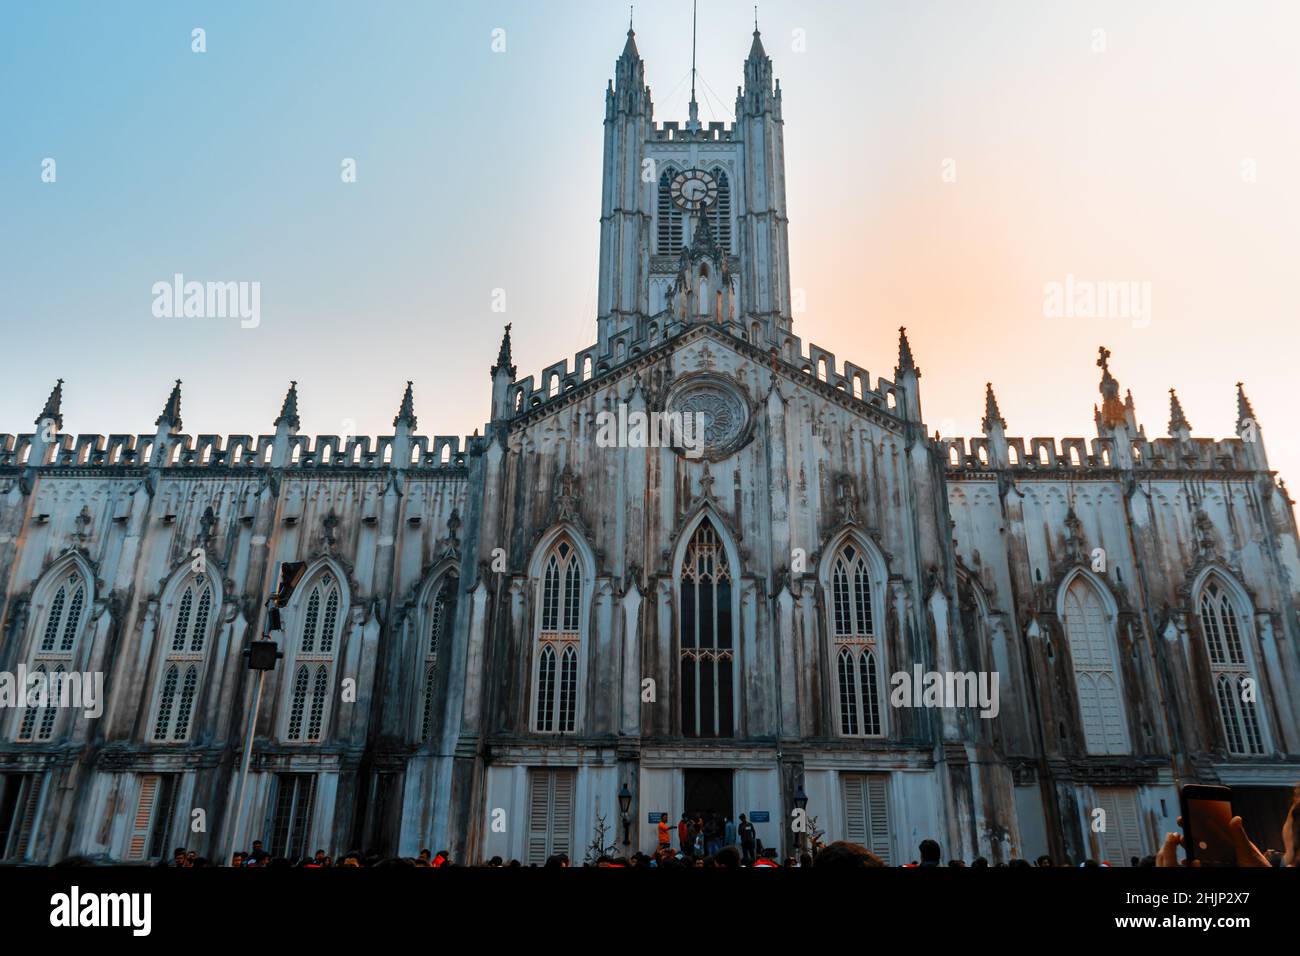 Kolkata, India - December 25, 2021: People visiting St. Paul's Cathedral Church to celebrate Christmas. Stock Photo